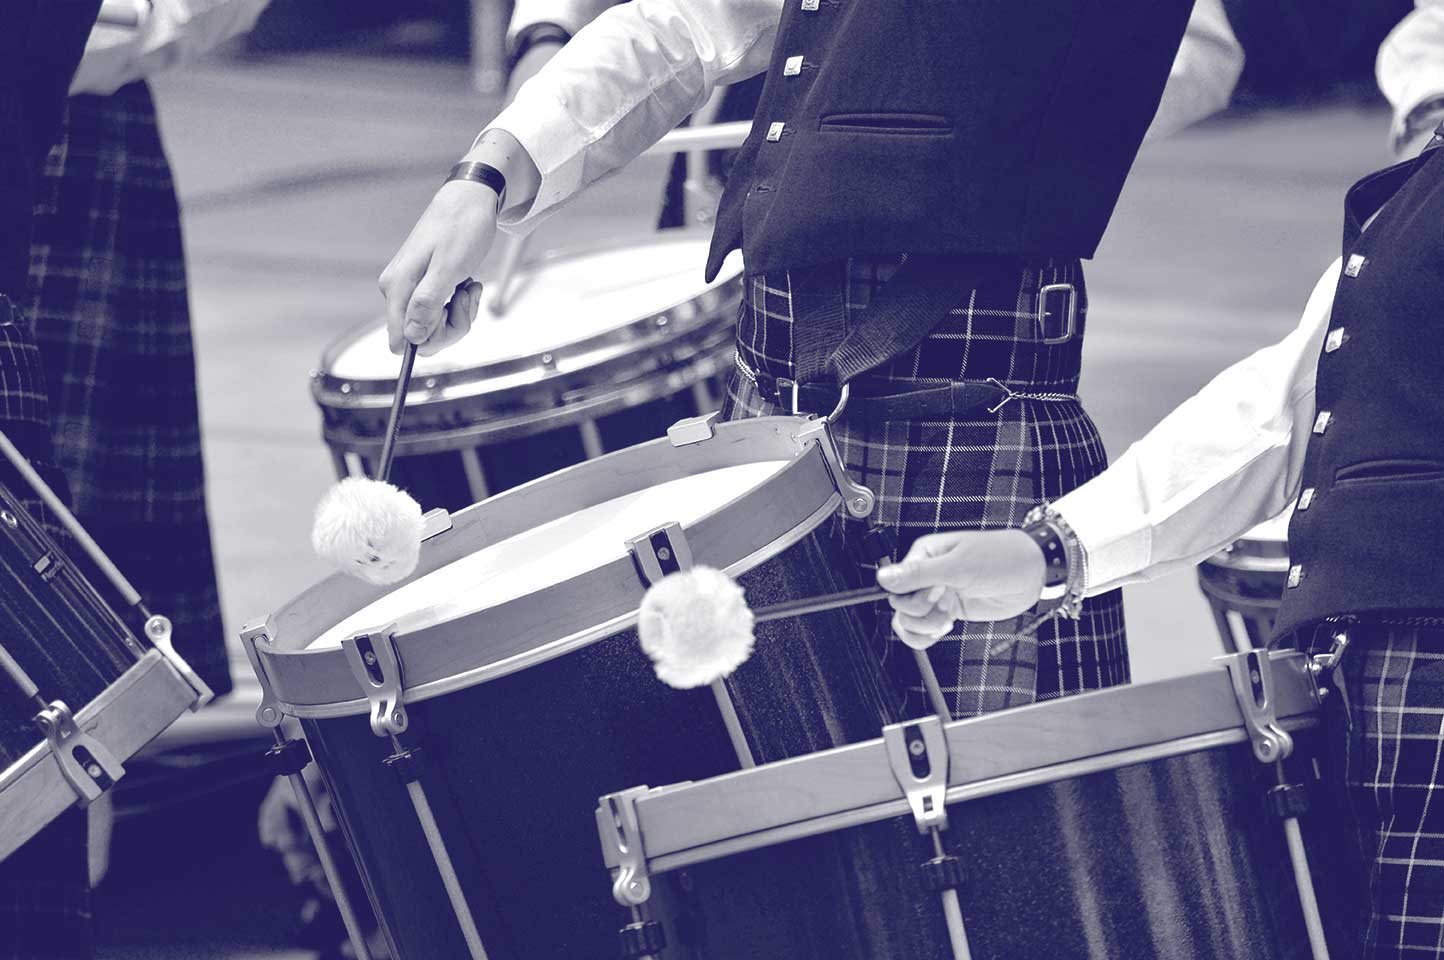 Photograph of drummers at the Kincardine Scottish Festival